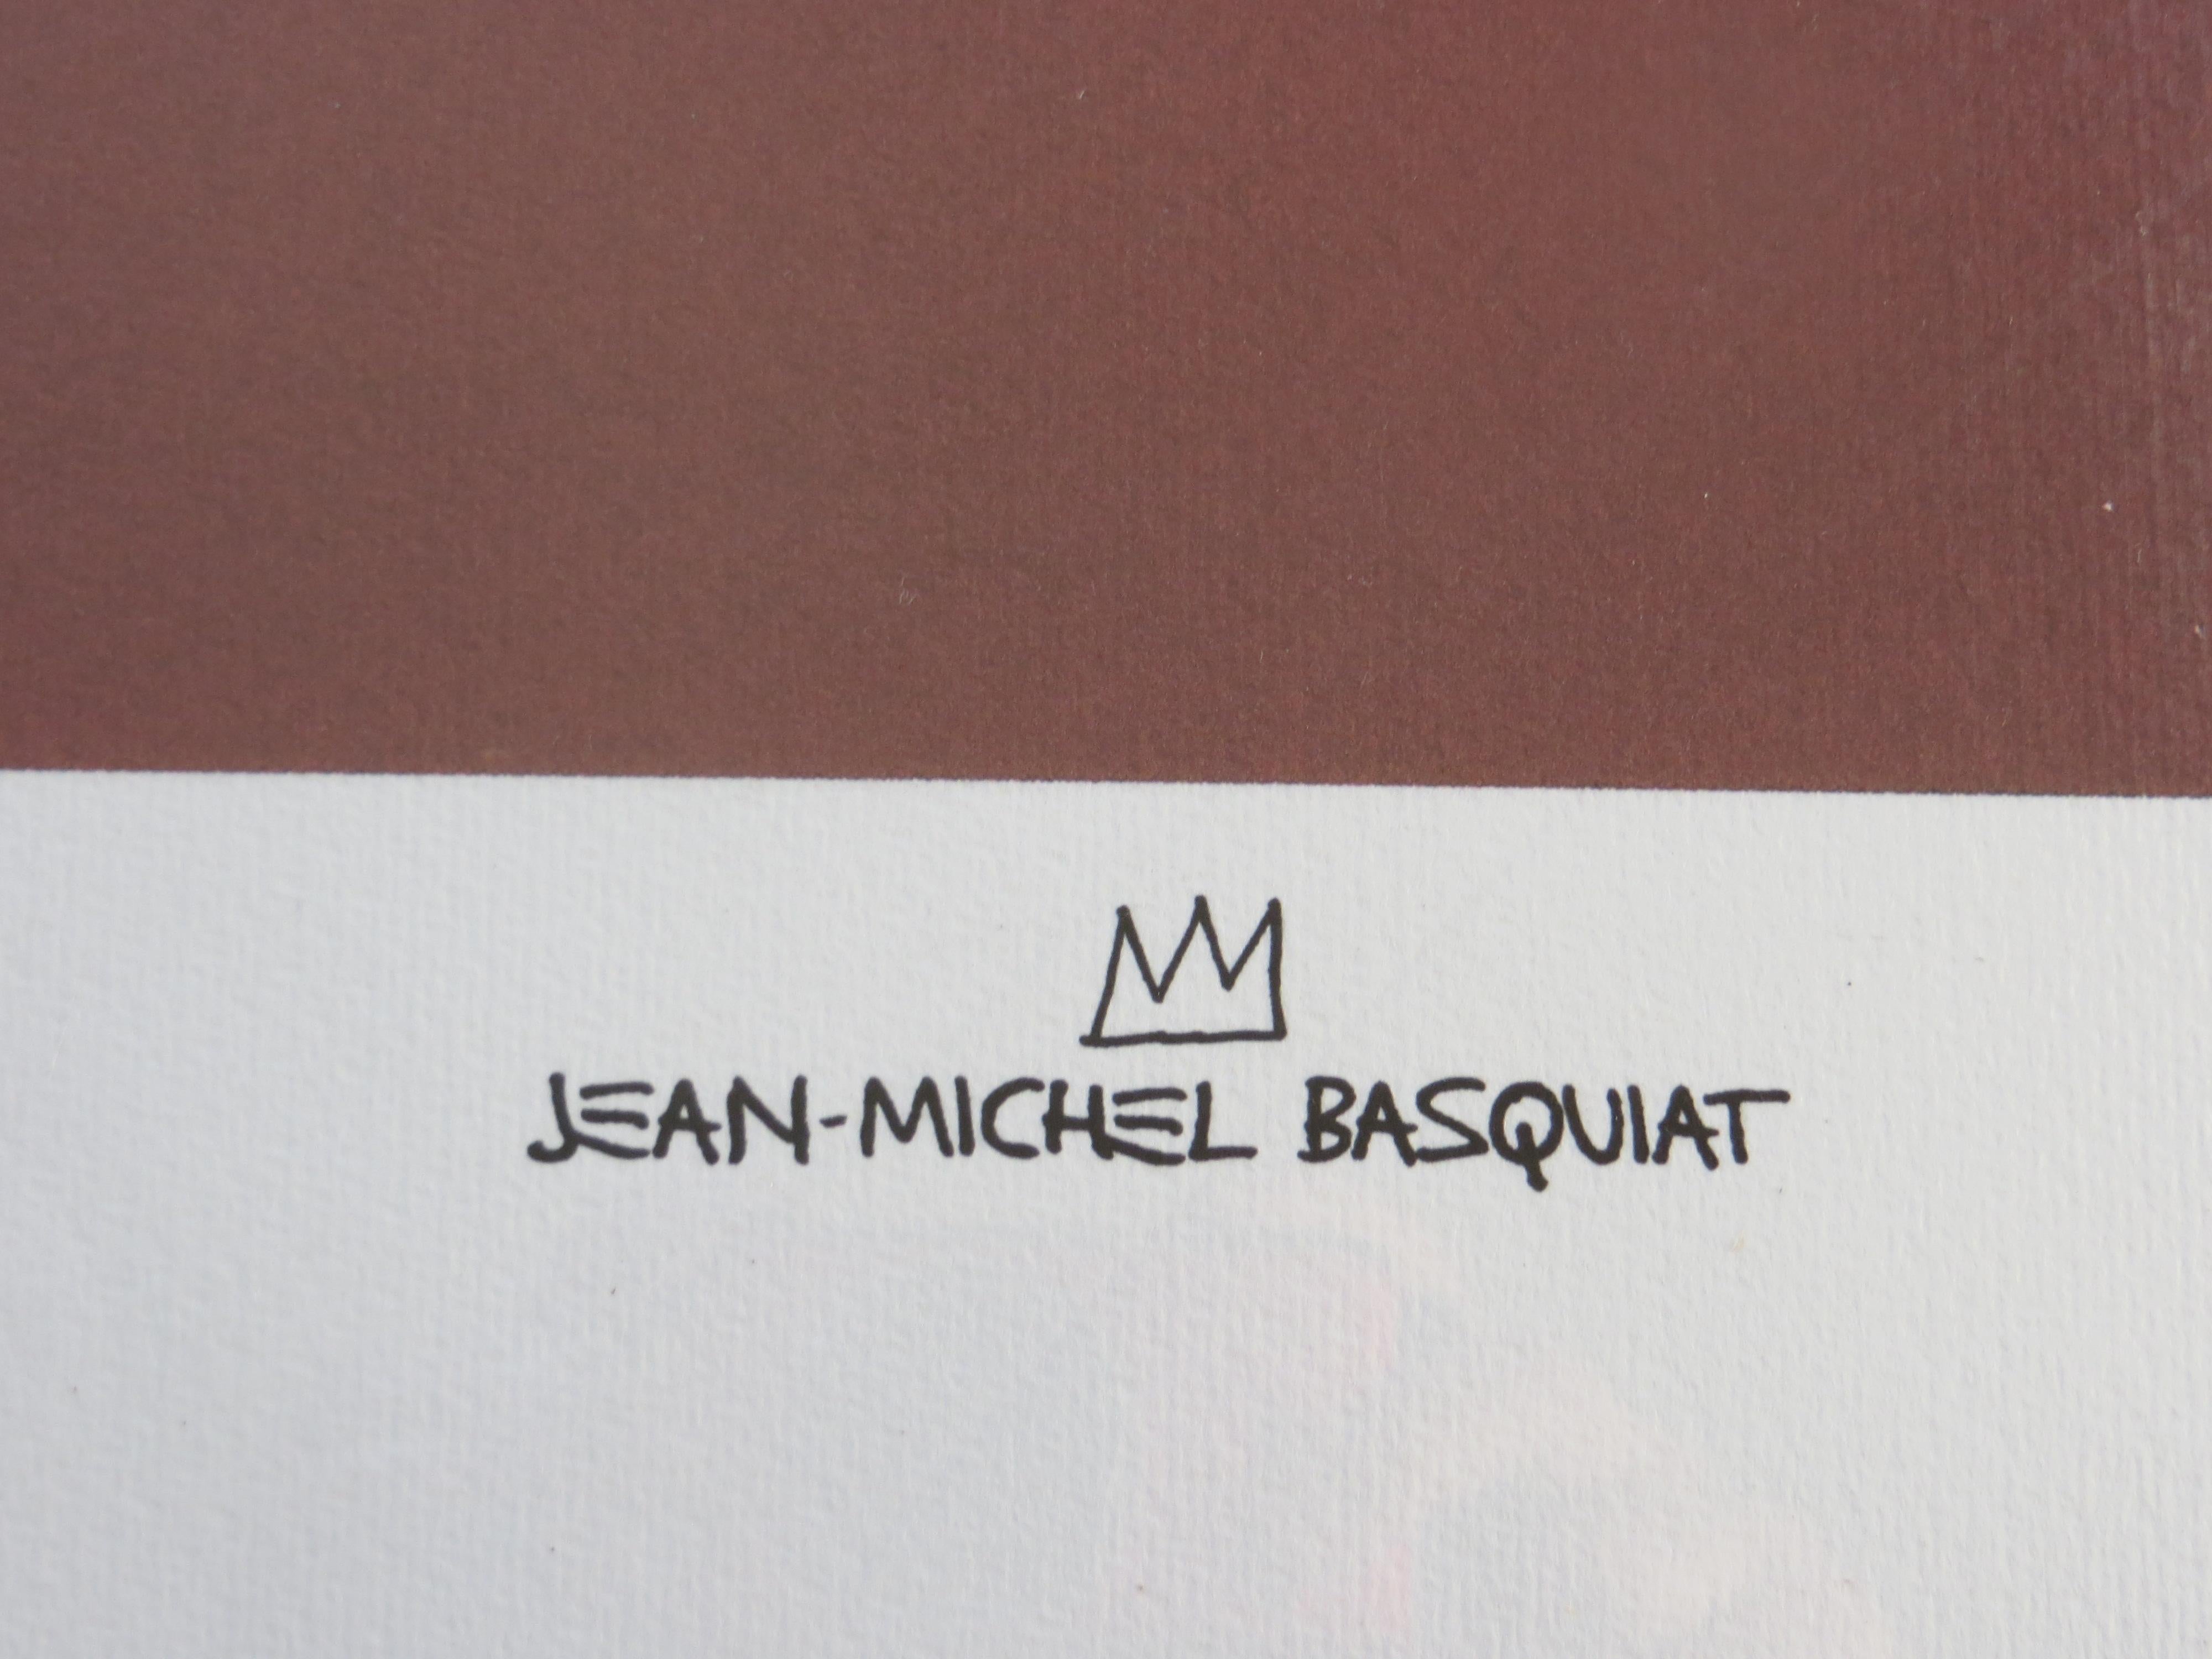 The Estate of Jean-Michel Basquiat,  Lithograph 160 /300 - Street Art Print by after Jean-Michel Basquiat